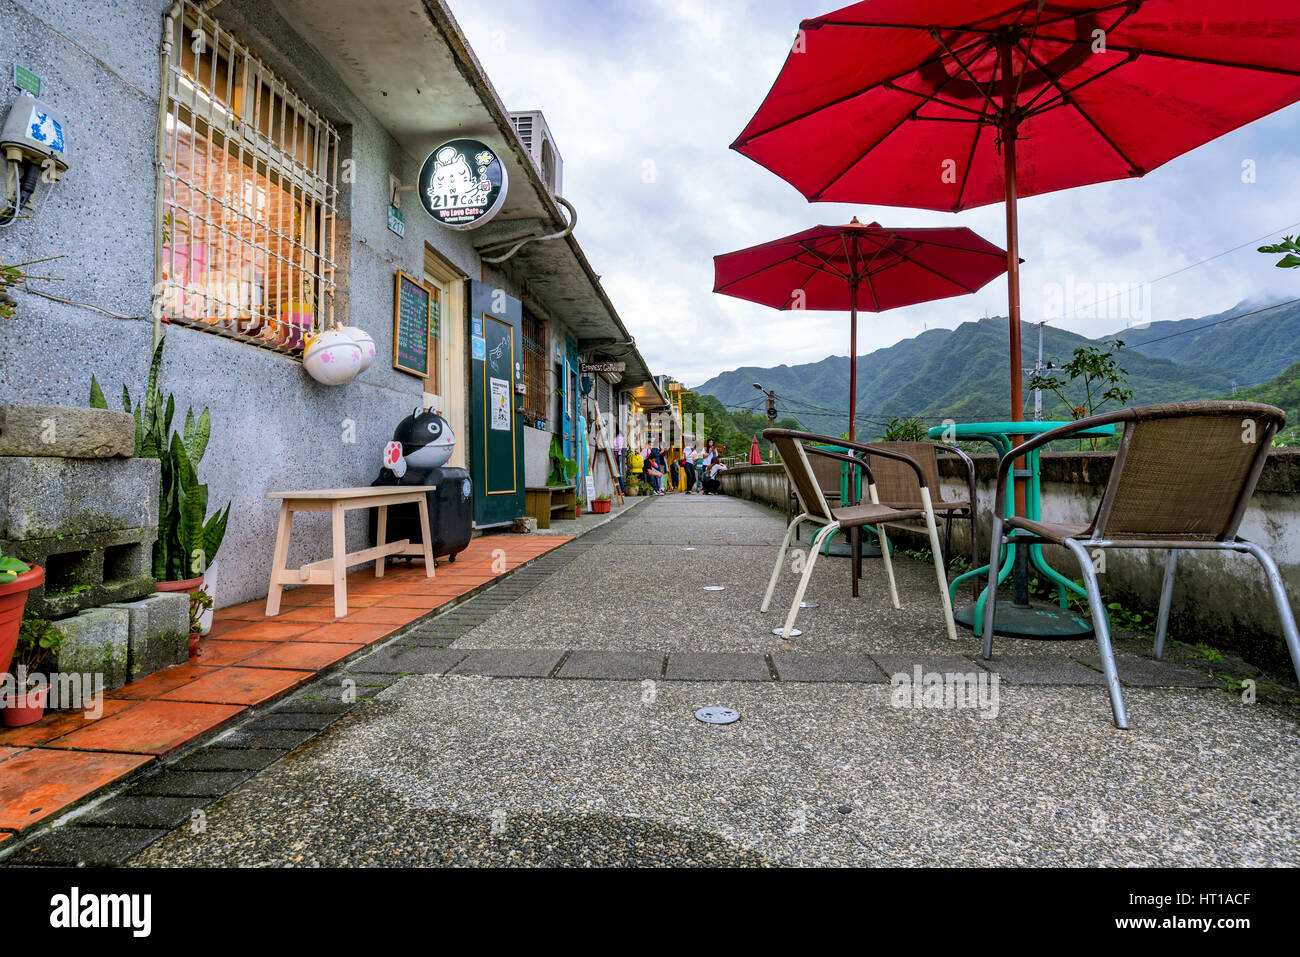 TAIPEI, TAIWAN - NOVEMBER 20: This is an evening view of cafes in Houtong cat village on November 20, 2016 in Taipei Stock Photo